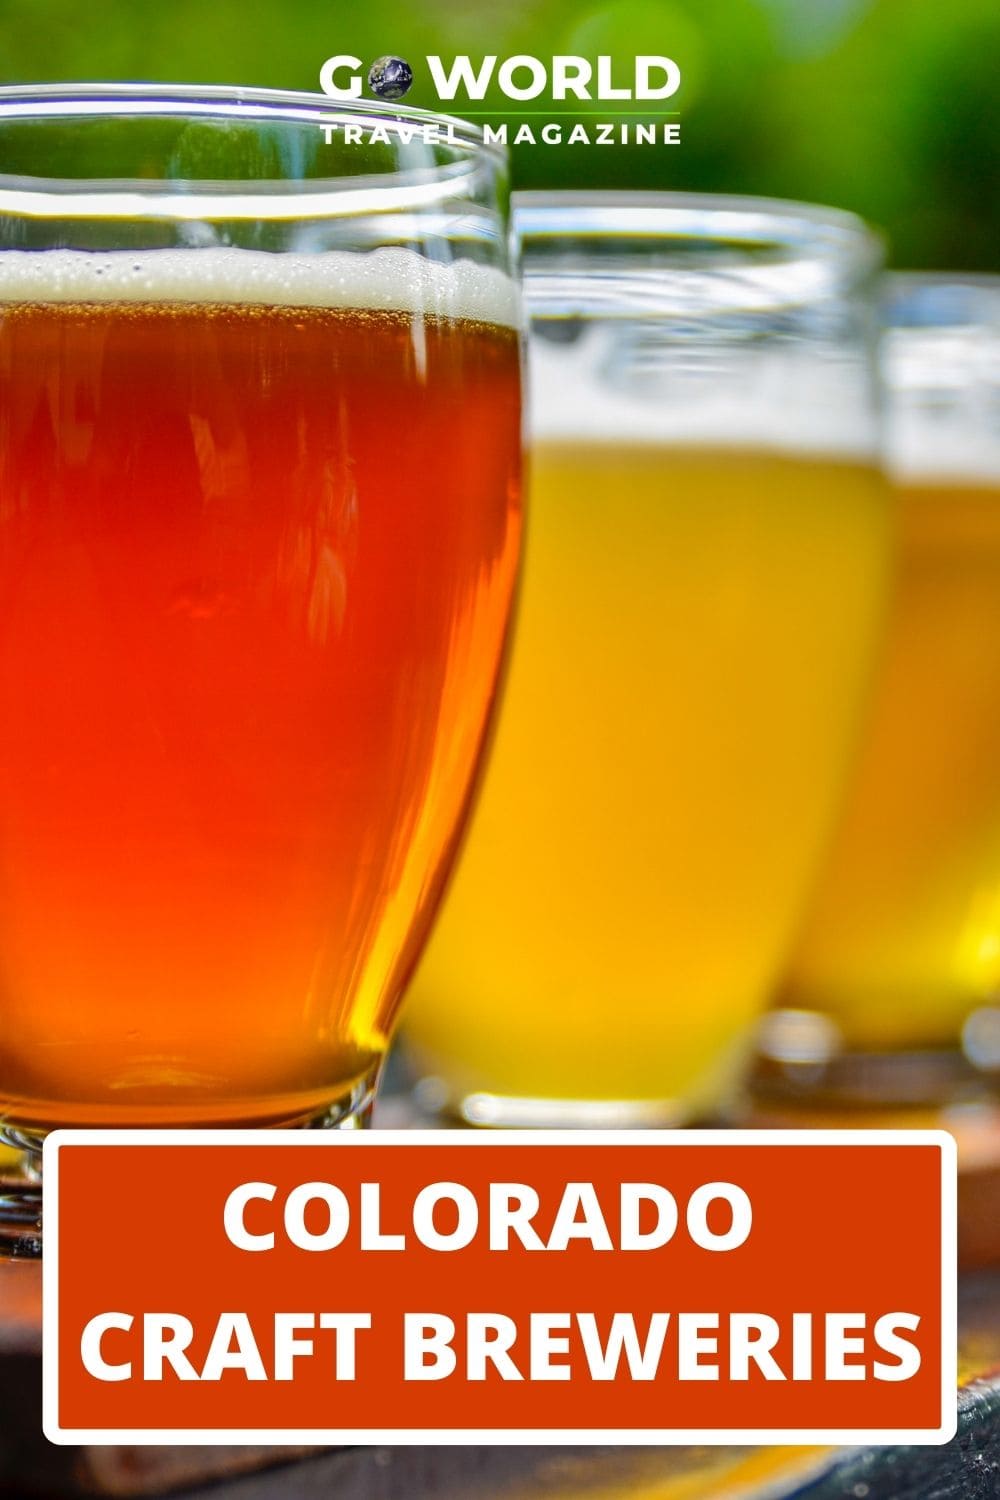 Get a taste of the best craft breweries in Colorado with the Denver Beer Trail and Colorado's Brewers Festival featuring hundreds of brewers.  #craftbeer #coloradocraftbreweries